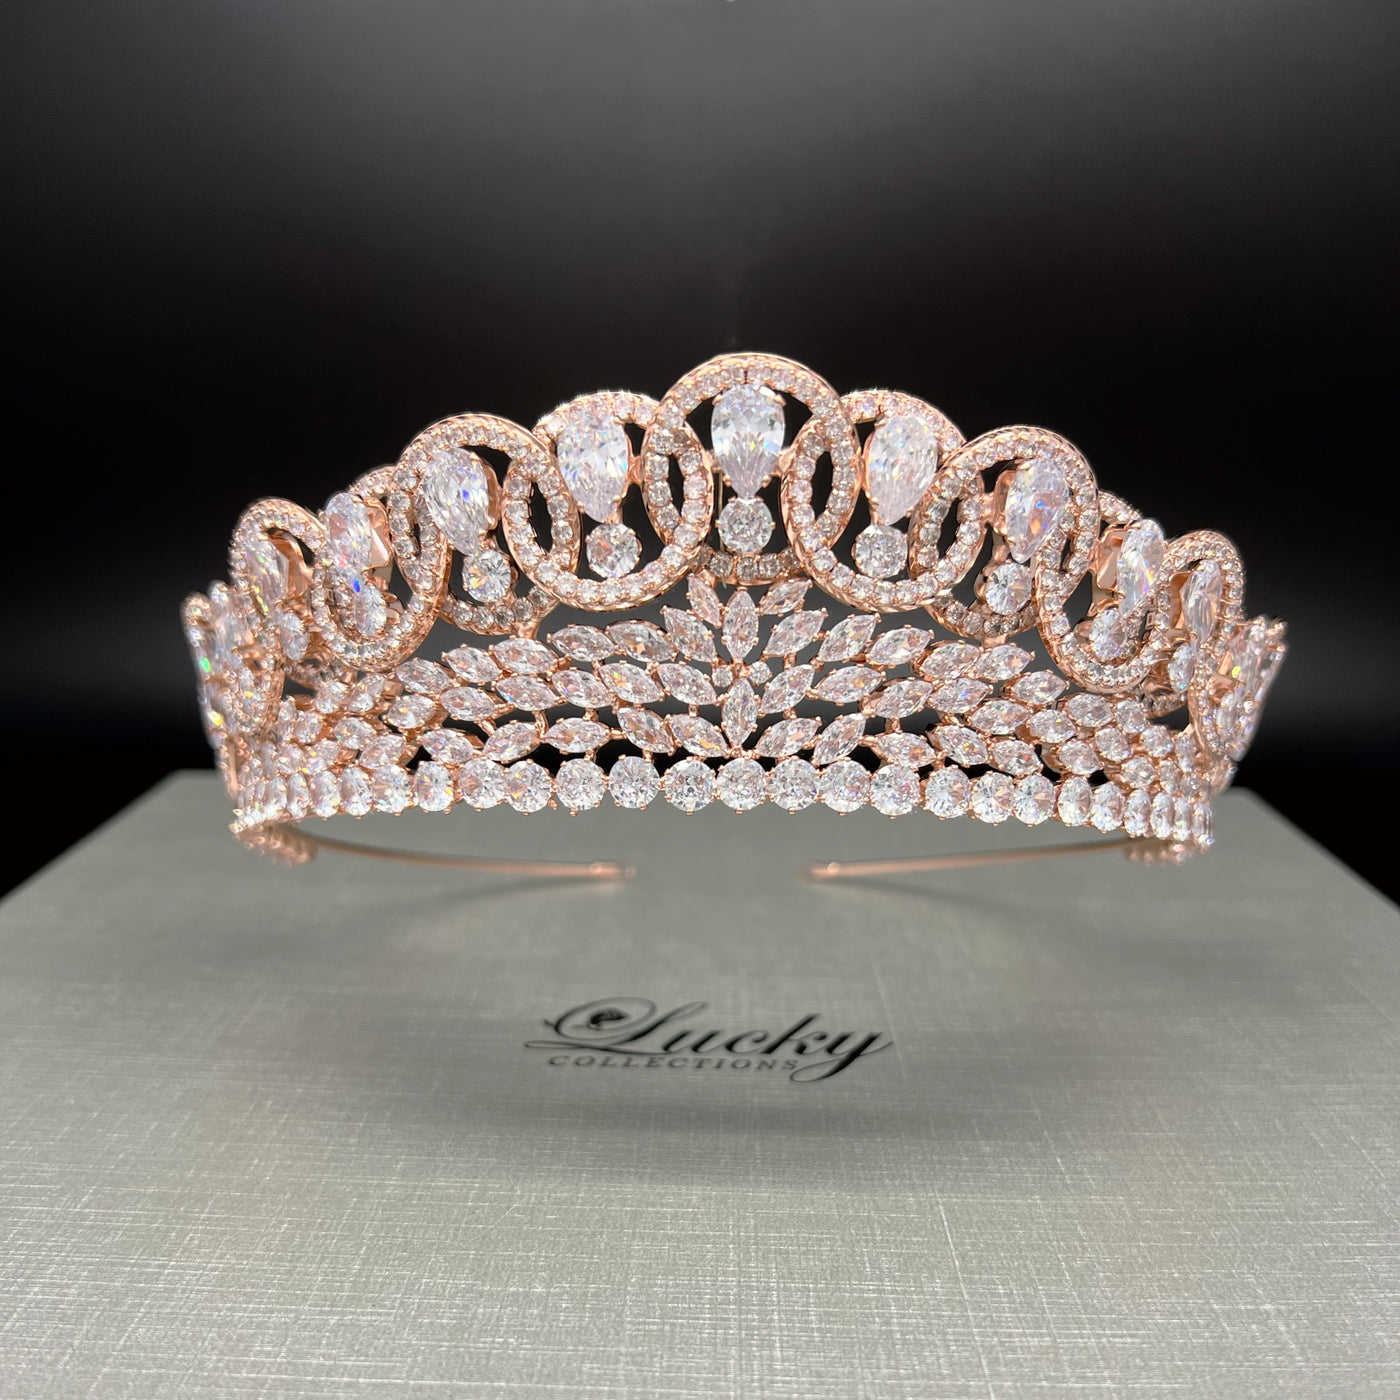 Zirconia Tiara, 2 Inch Central Height, Magnificent Details by Lucky Collections ™